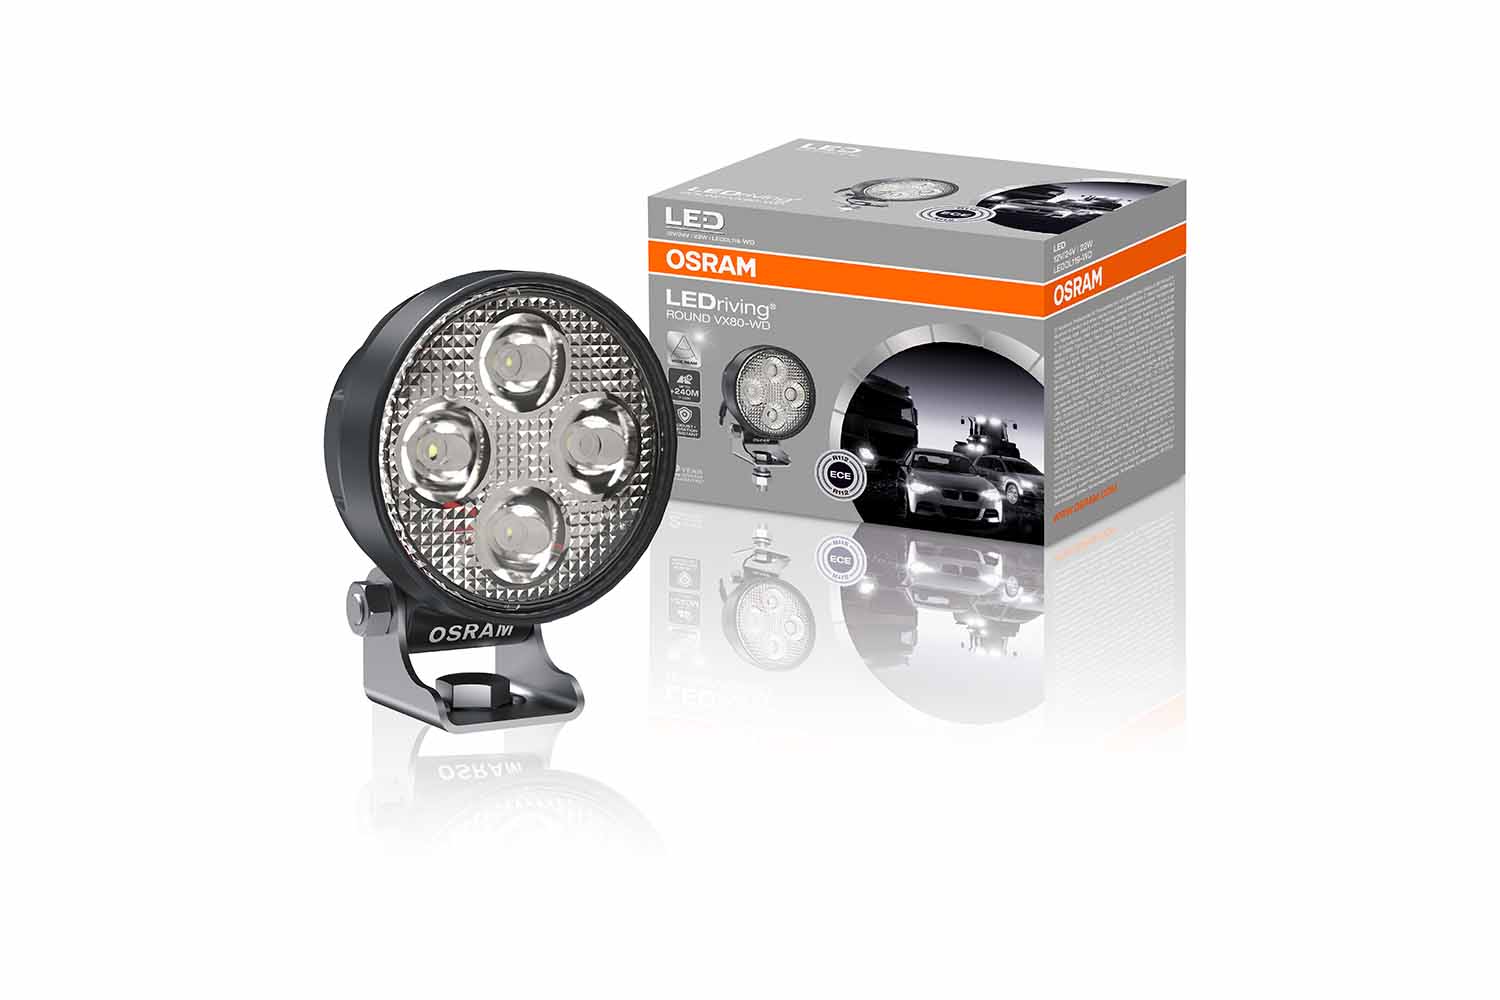 ▷ Osram LED WL Round VX80-WD - available here!